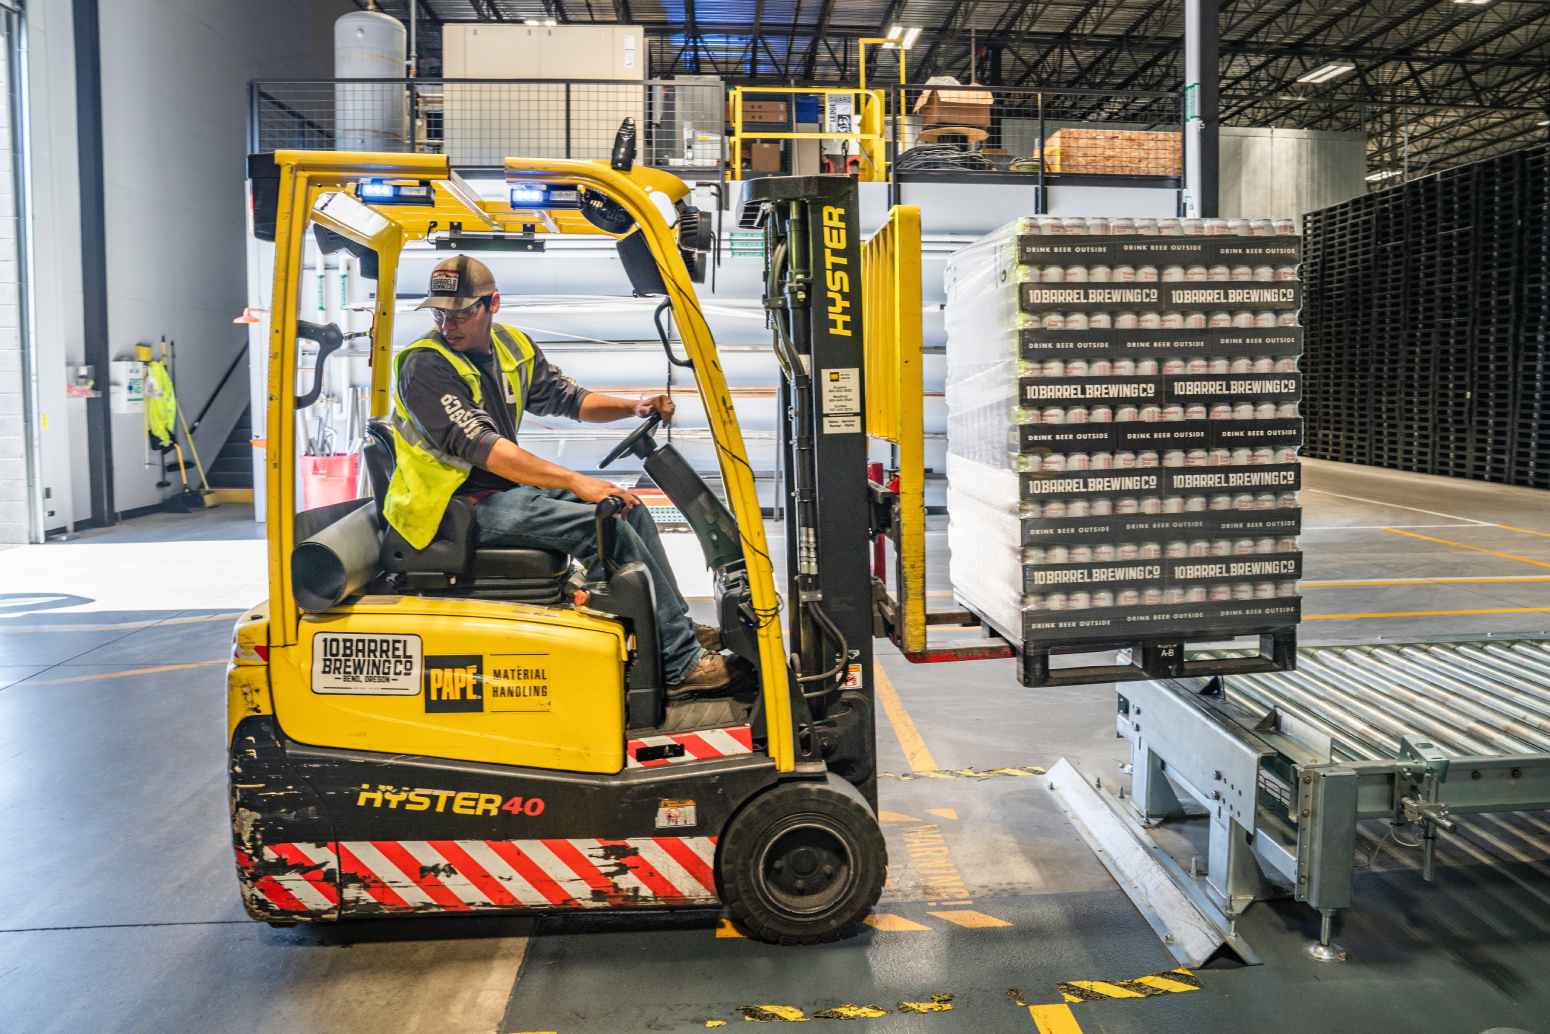 Forklift moving pallet in warehouse